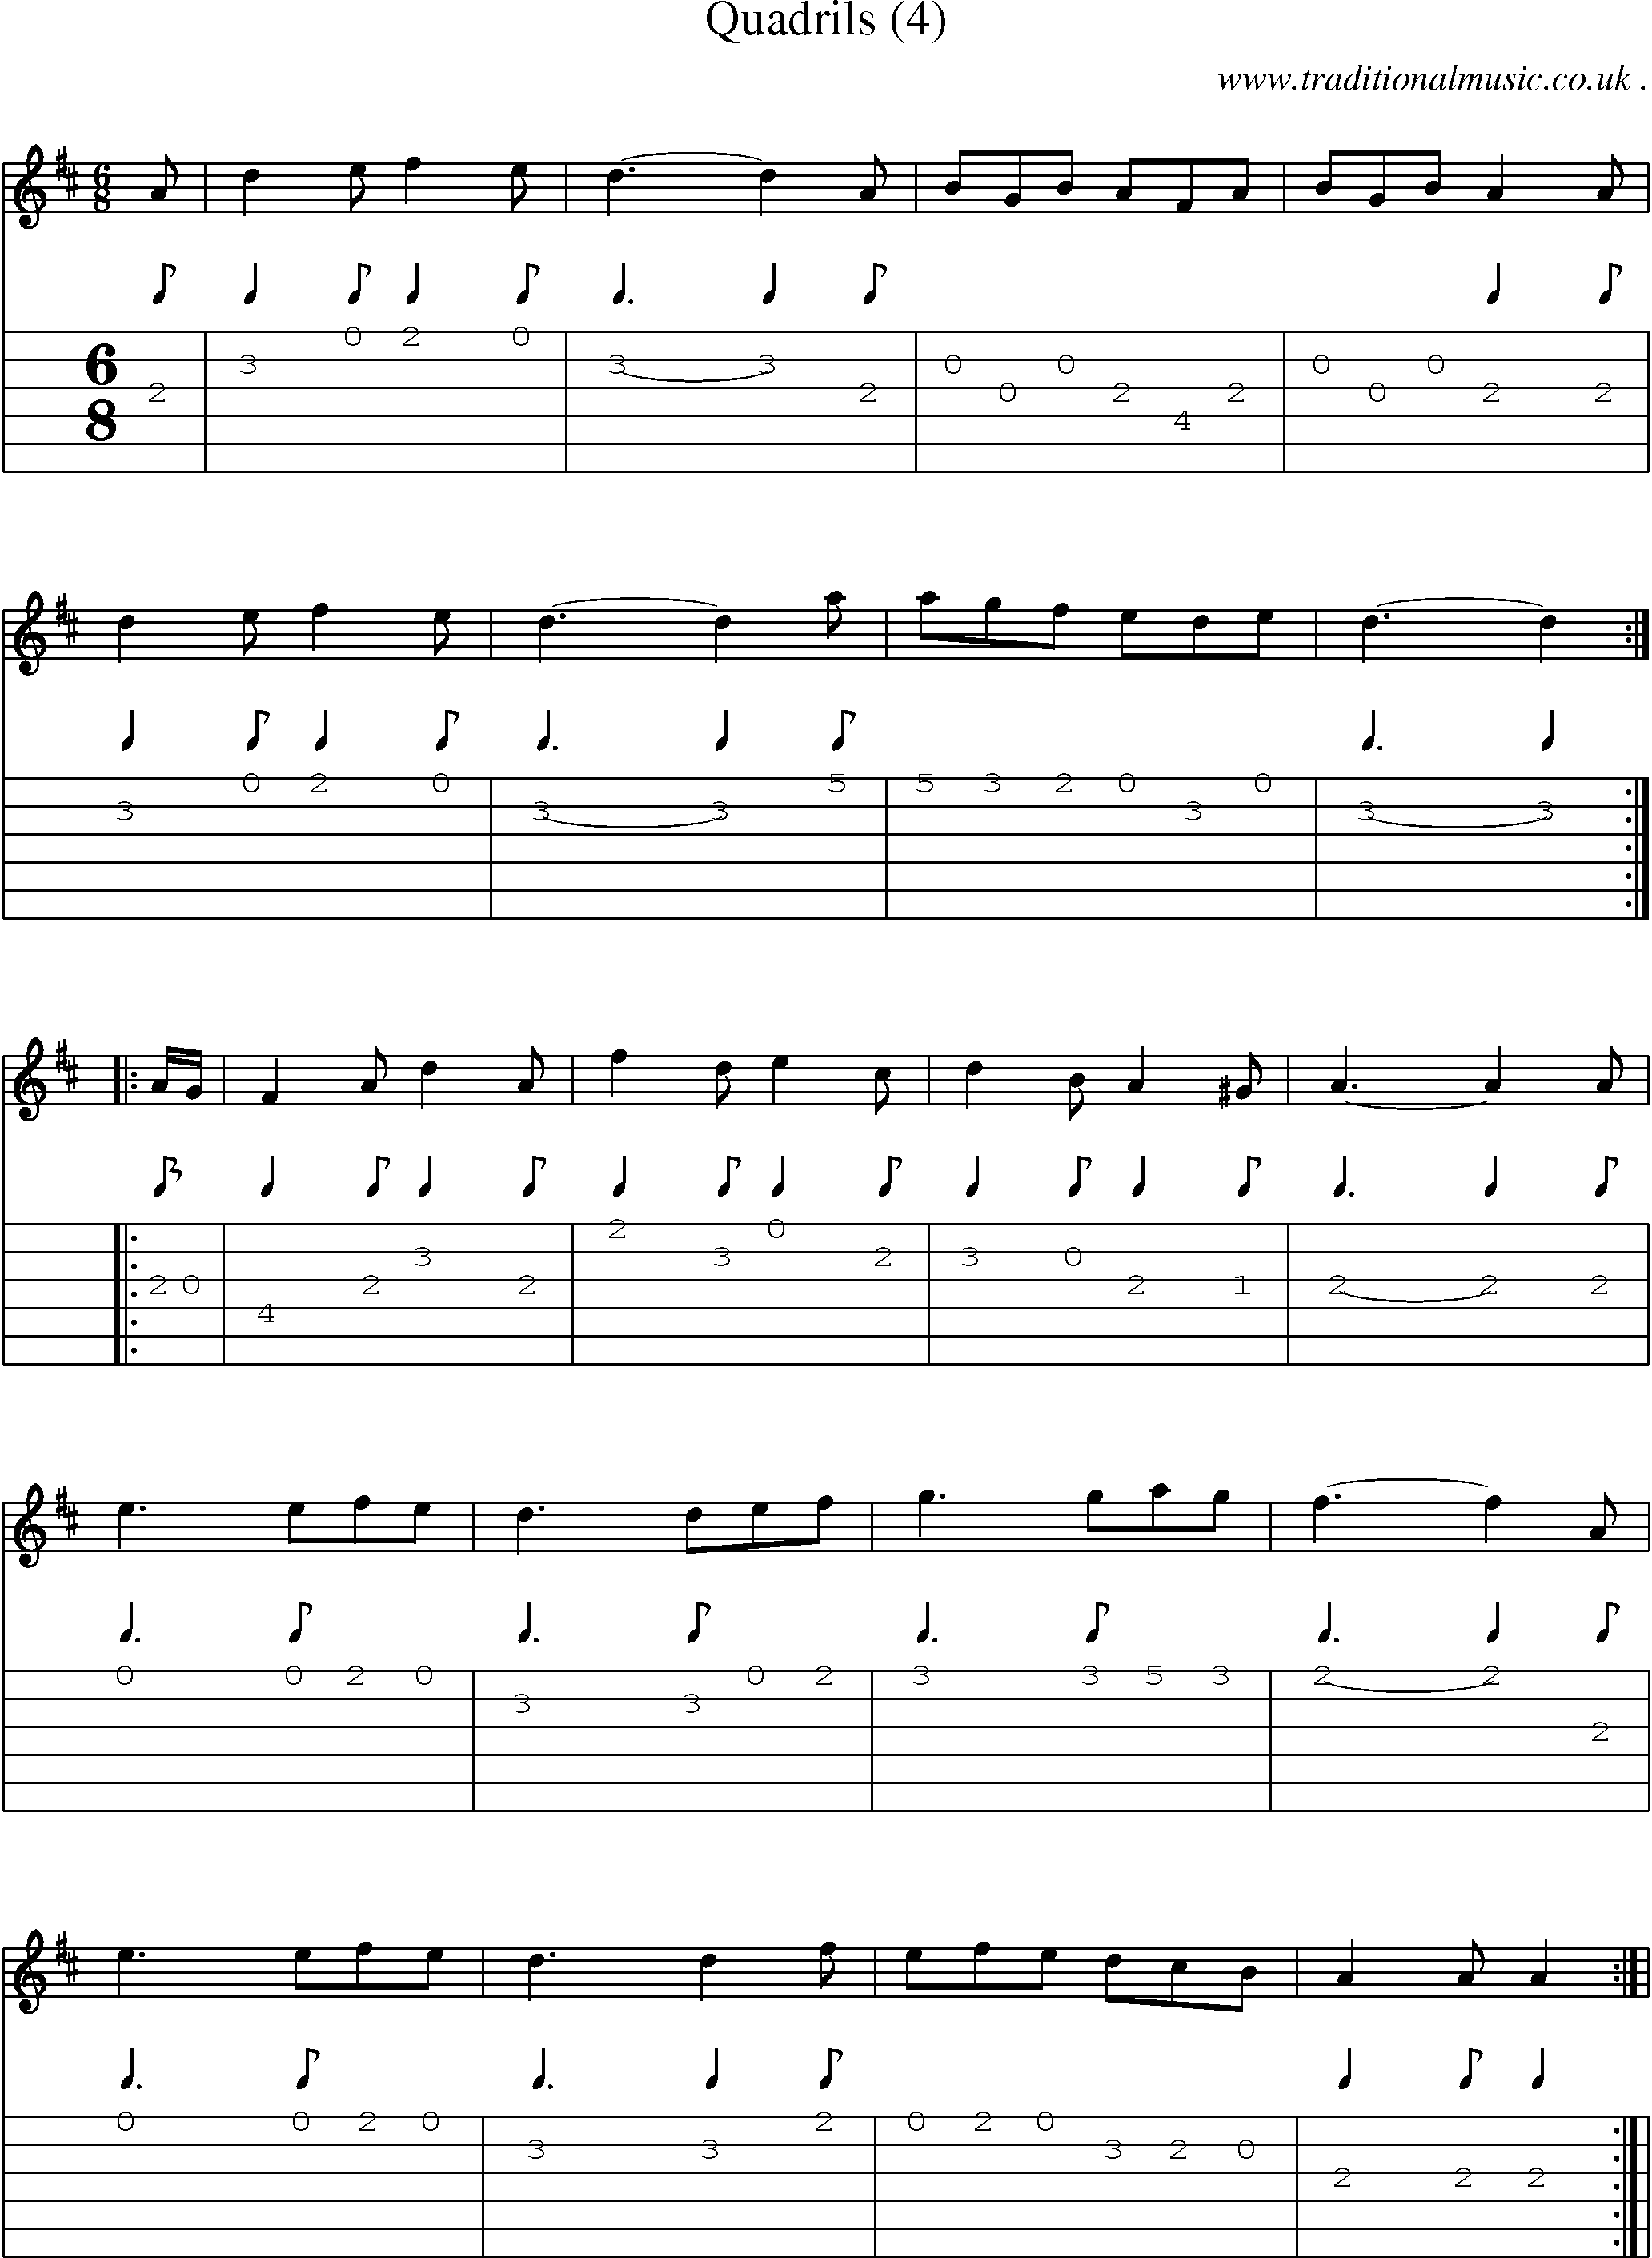 Sheet-Music and Guitar Tabs for Quadrils (4)